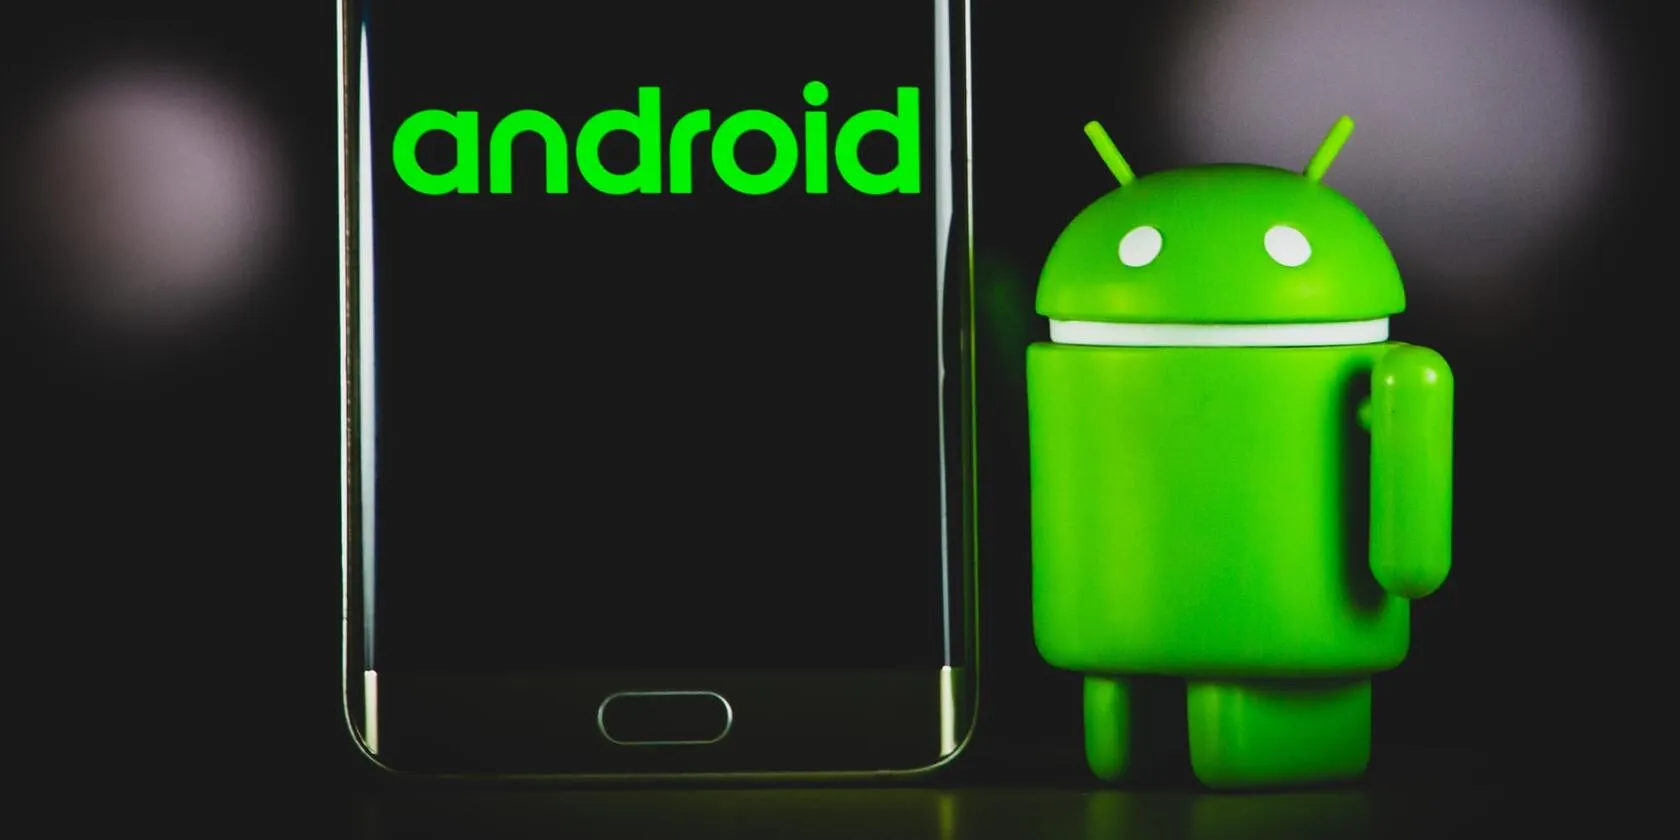 What Is An Android And What Is The Use Of Android?